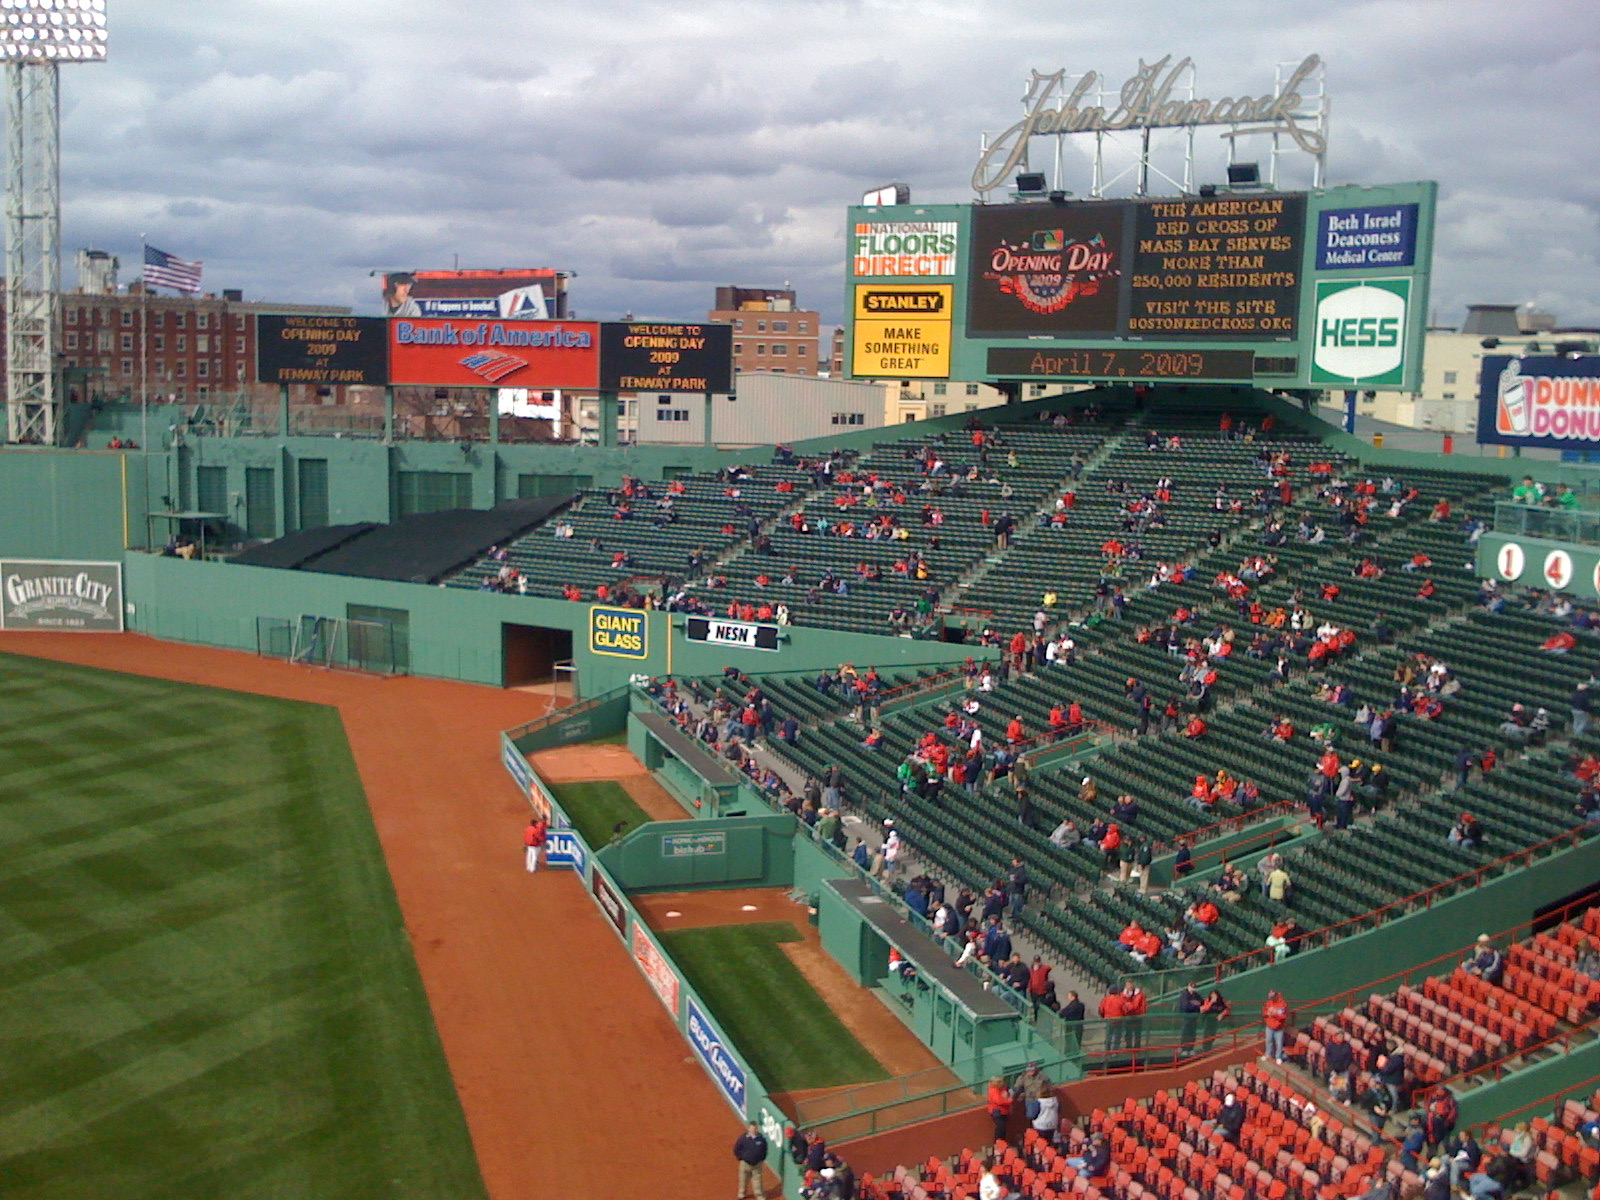 Fenway Park on Opening Day, 2009